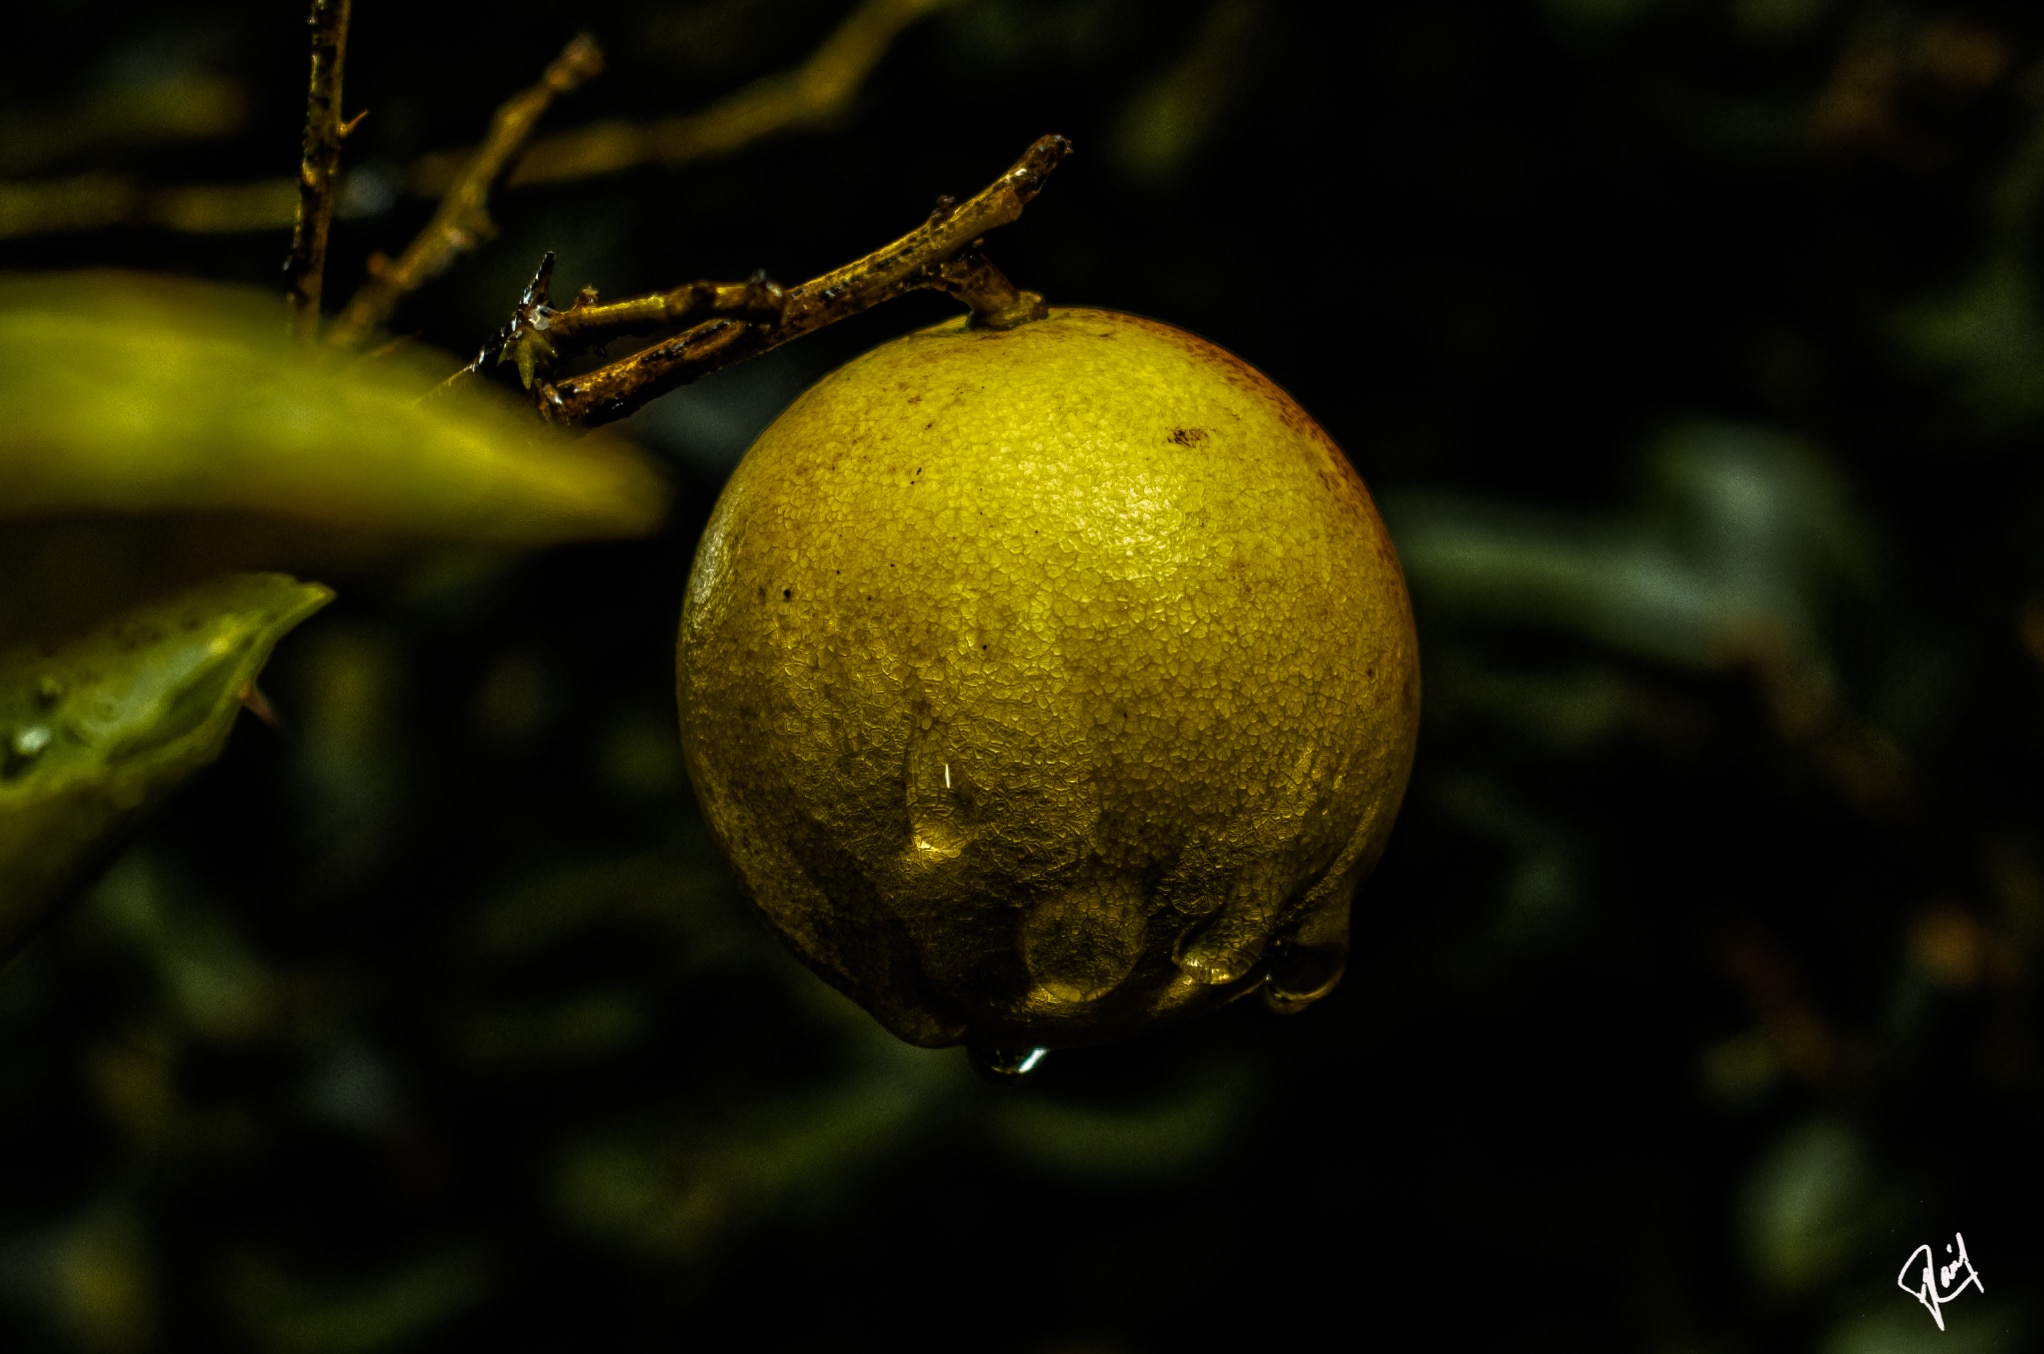 Snow White's Lemon, the biofriendly image of the day.